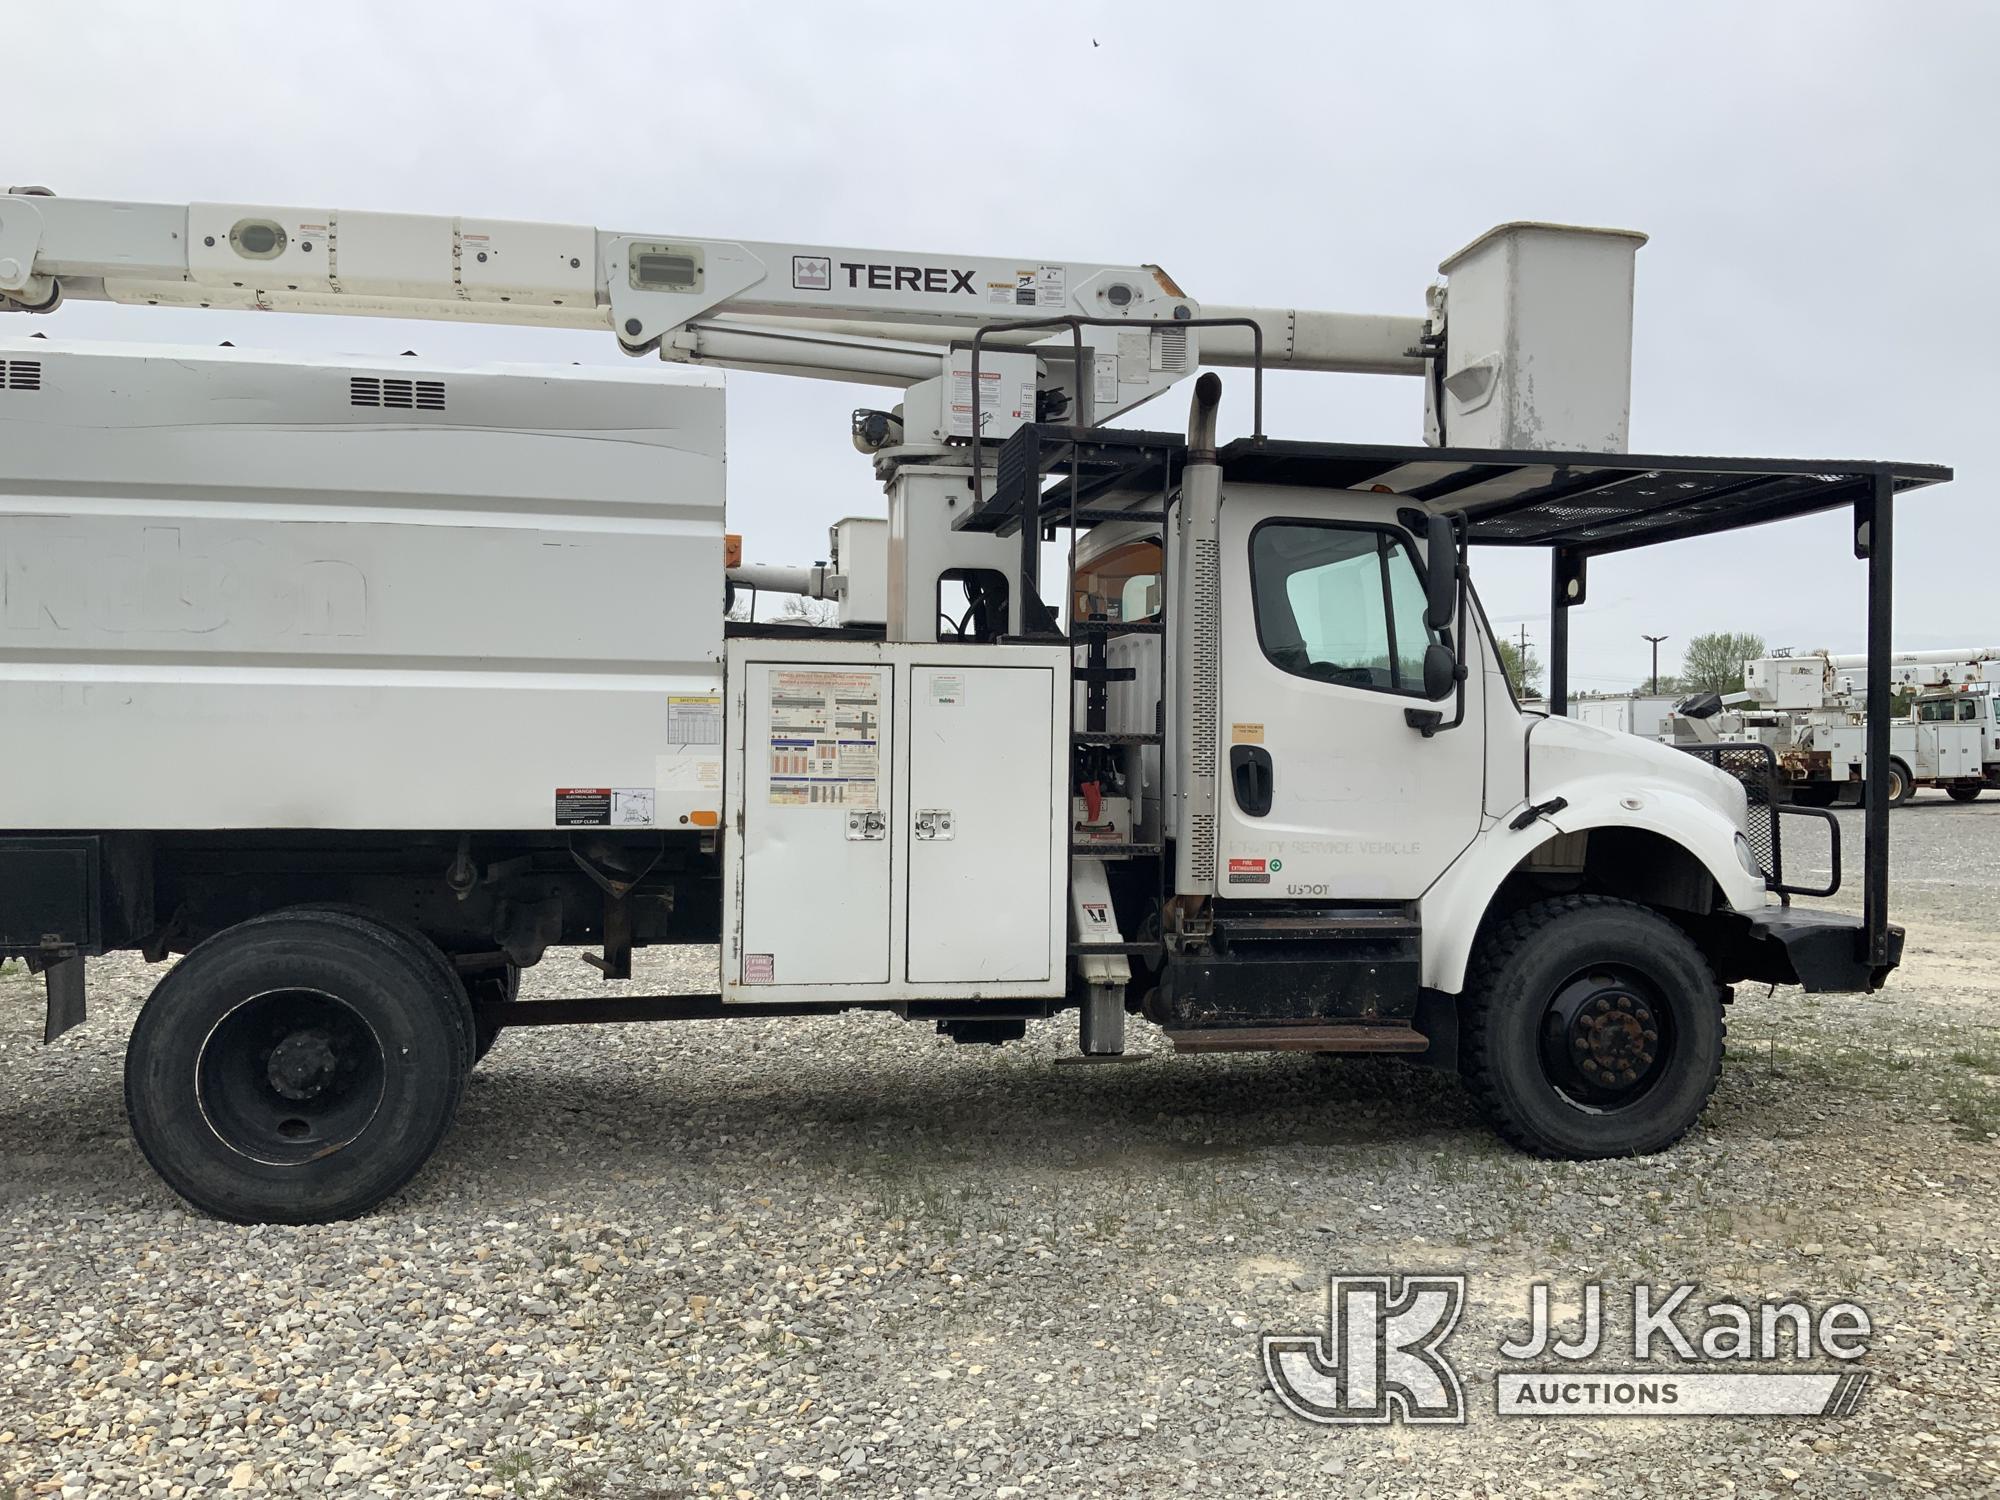 (Hawk Point, MO) Terex XT55, Over-Center Bucket Truck mounted behind cab on 2012 Freightliner M2 106